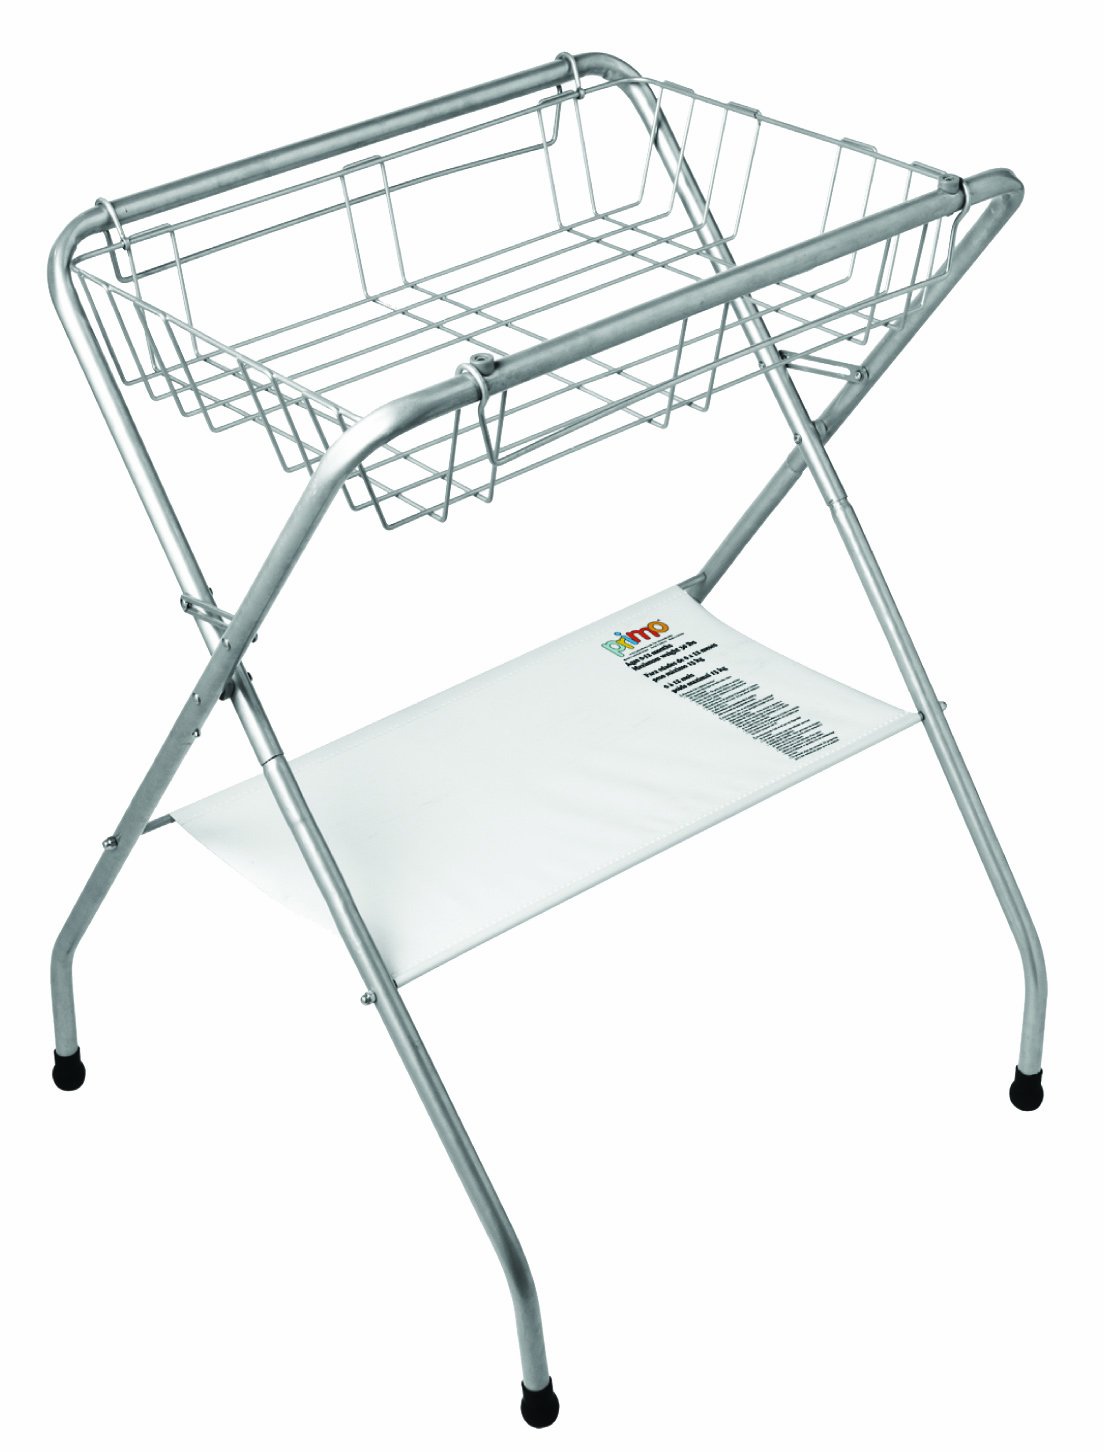 Primo Folding Bath Stand - Lightweight, Easy to Store, Helps Relieve Back Strain from Bending, Ages: Months Silver Gray - image 1 of 2